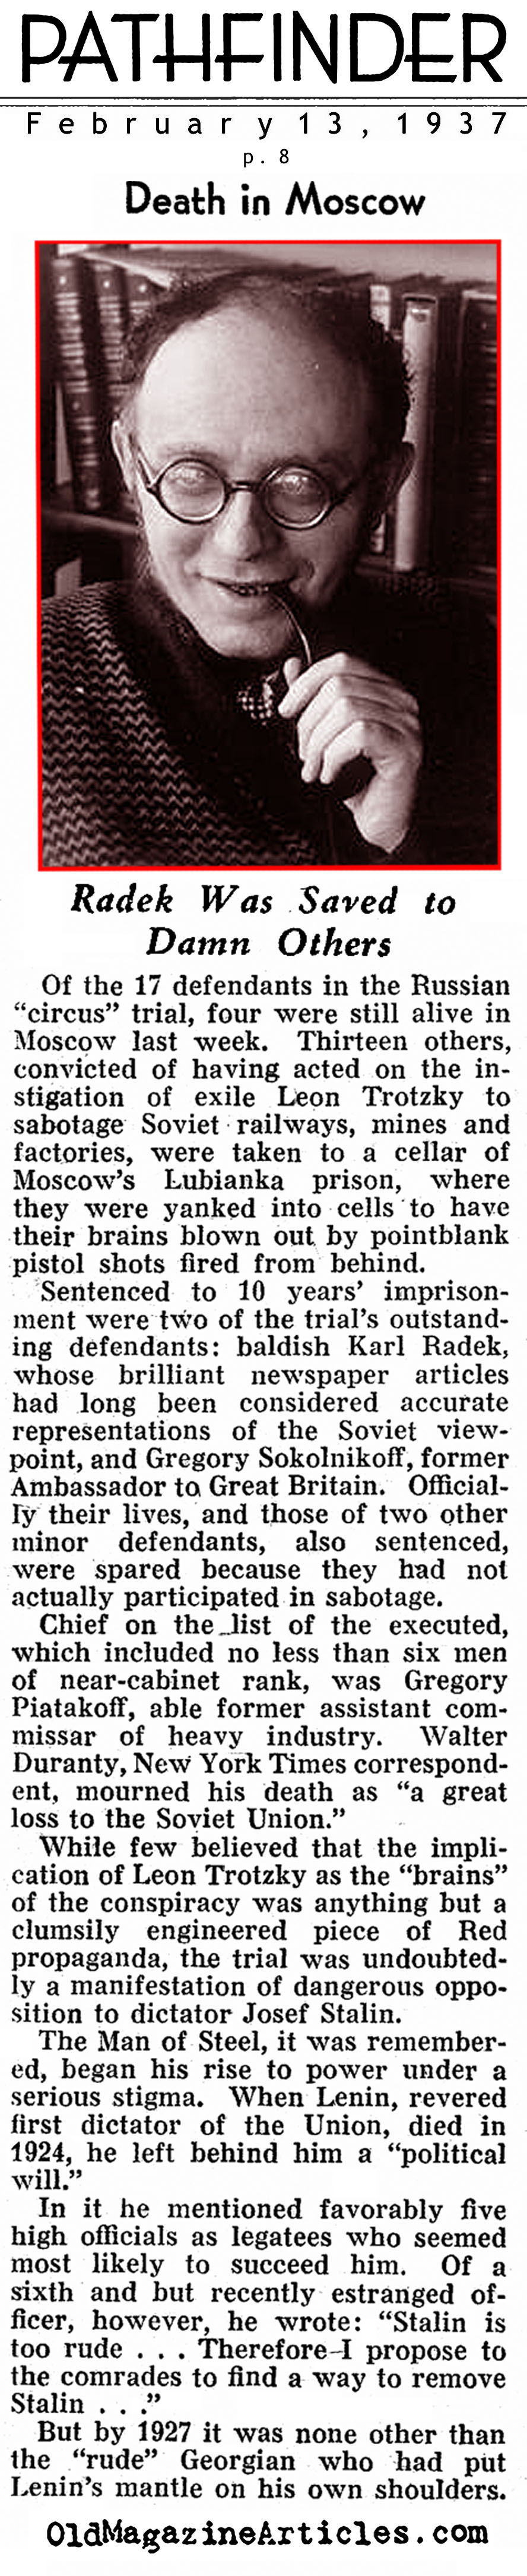 The Moscow Show Trials Continue (Pathfinder Magazine, 1937)